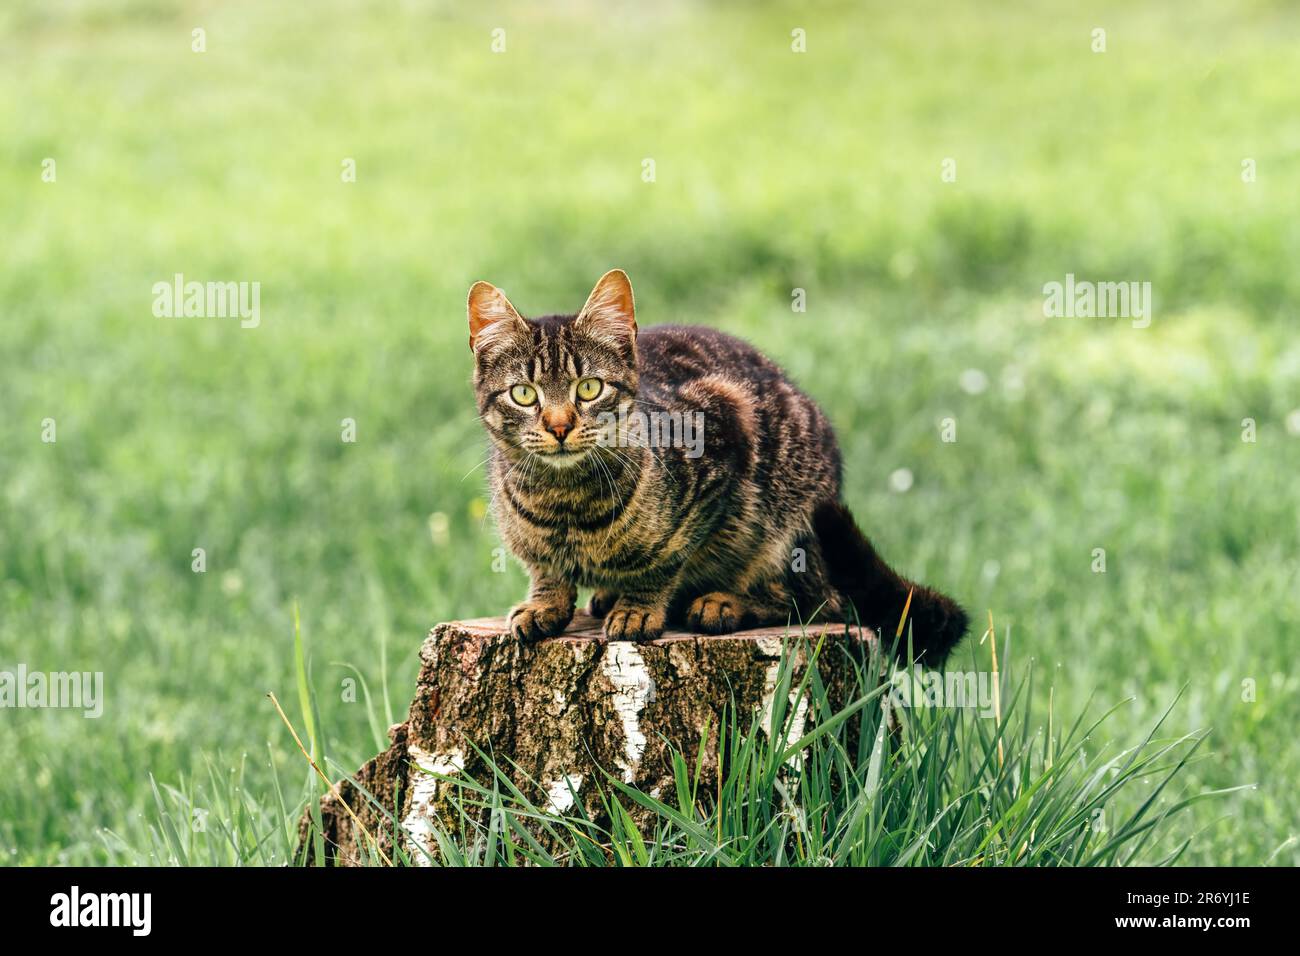 Cute young cat on tree stump in back yard looking at camera, selective focus Stock Photo